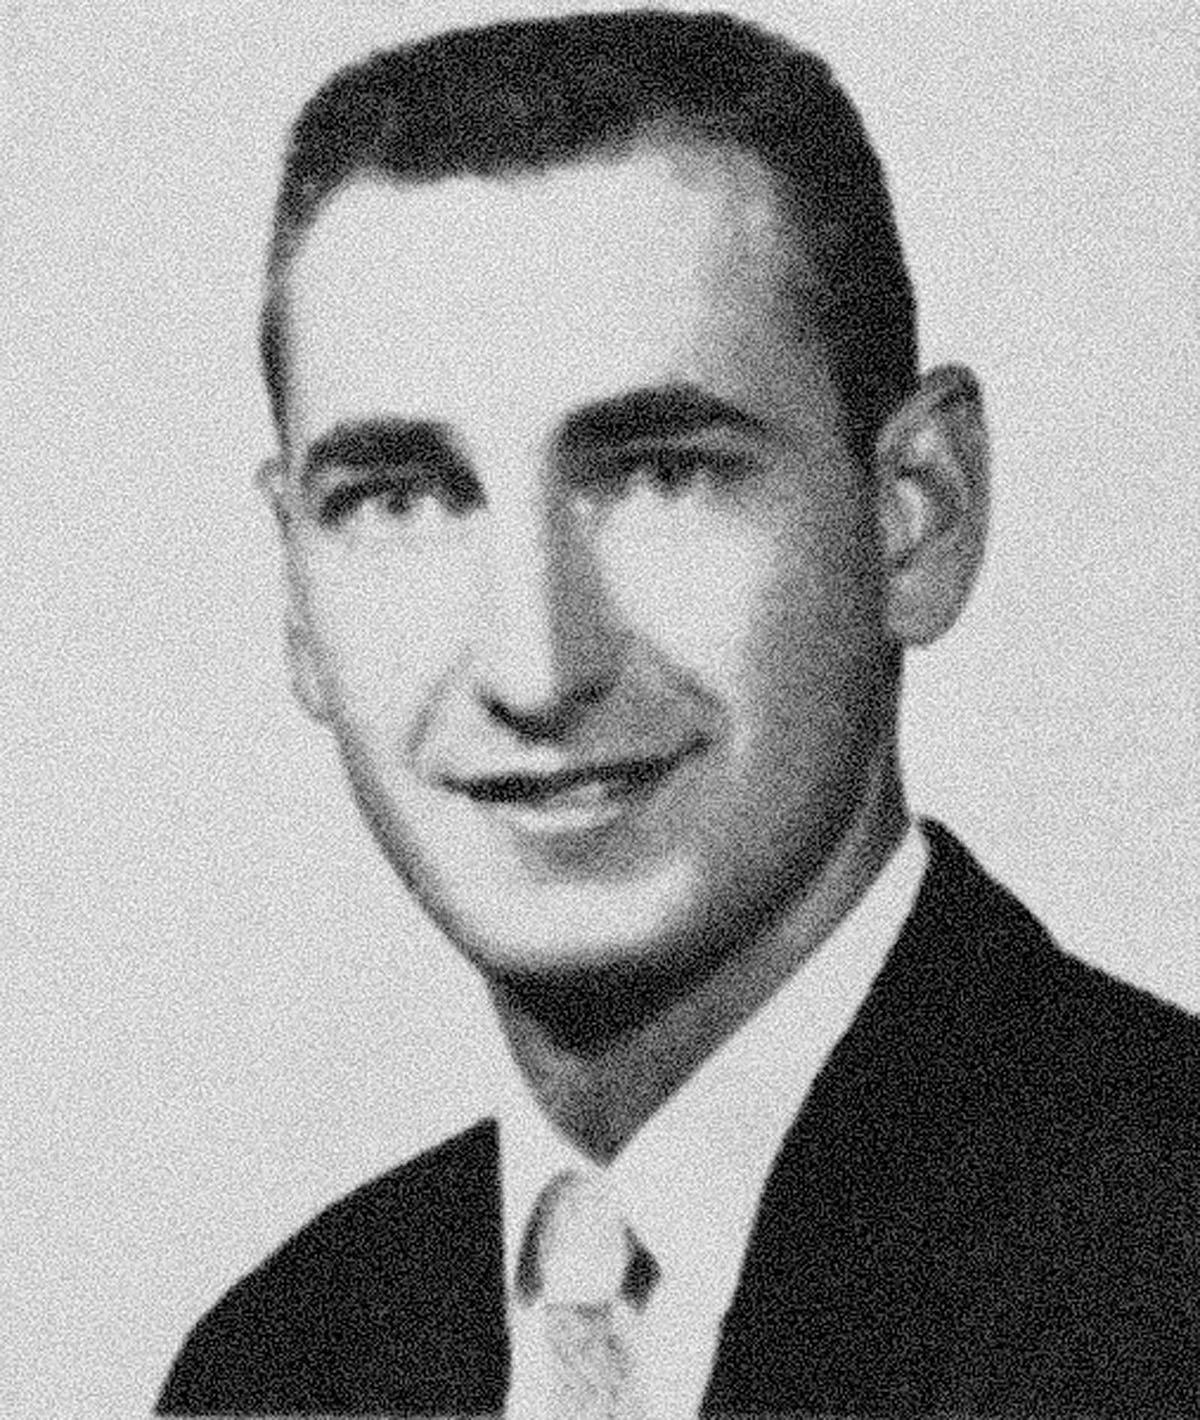 B.D. Owens, pictured as a Northwest student, graduated from the institution in 1959 and was the first alumnus to lead it.